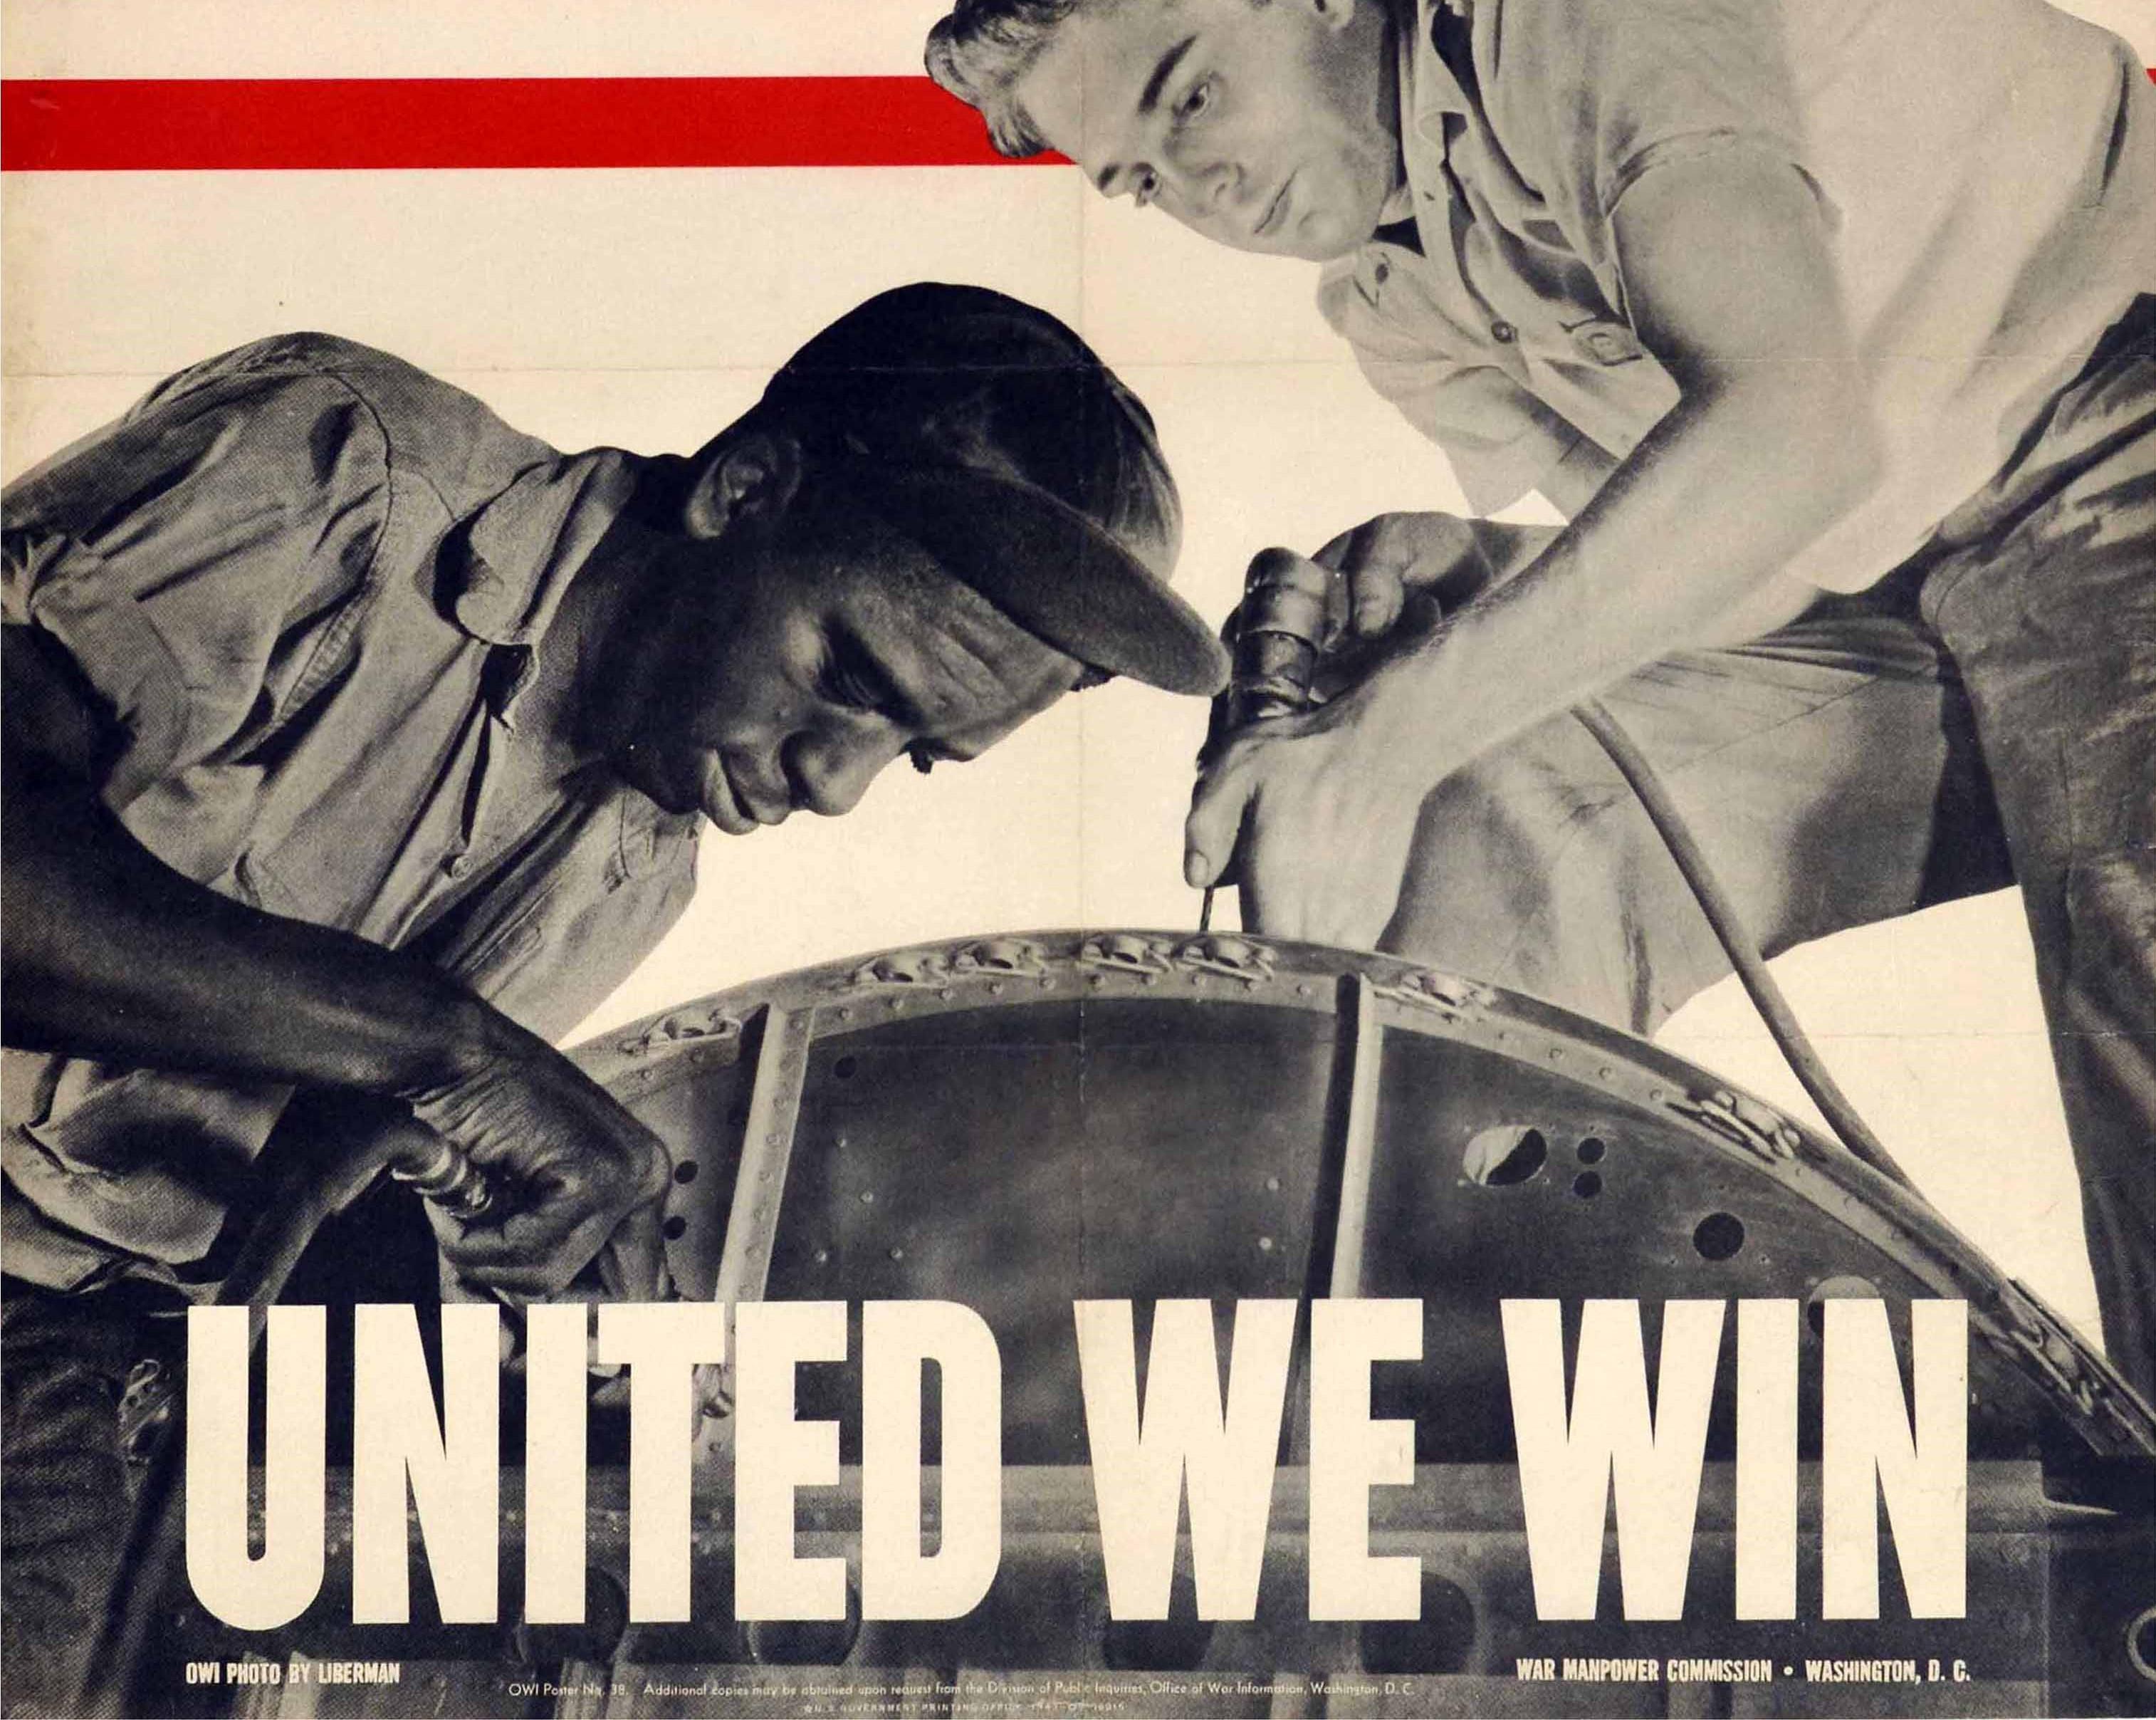 united we win poster meaning